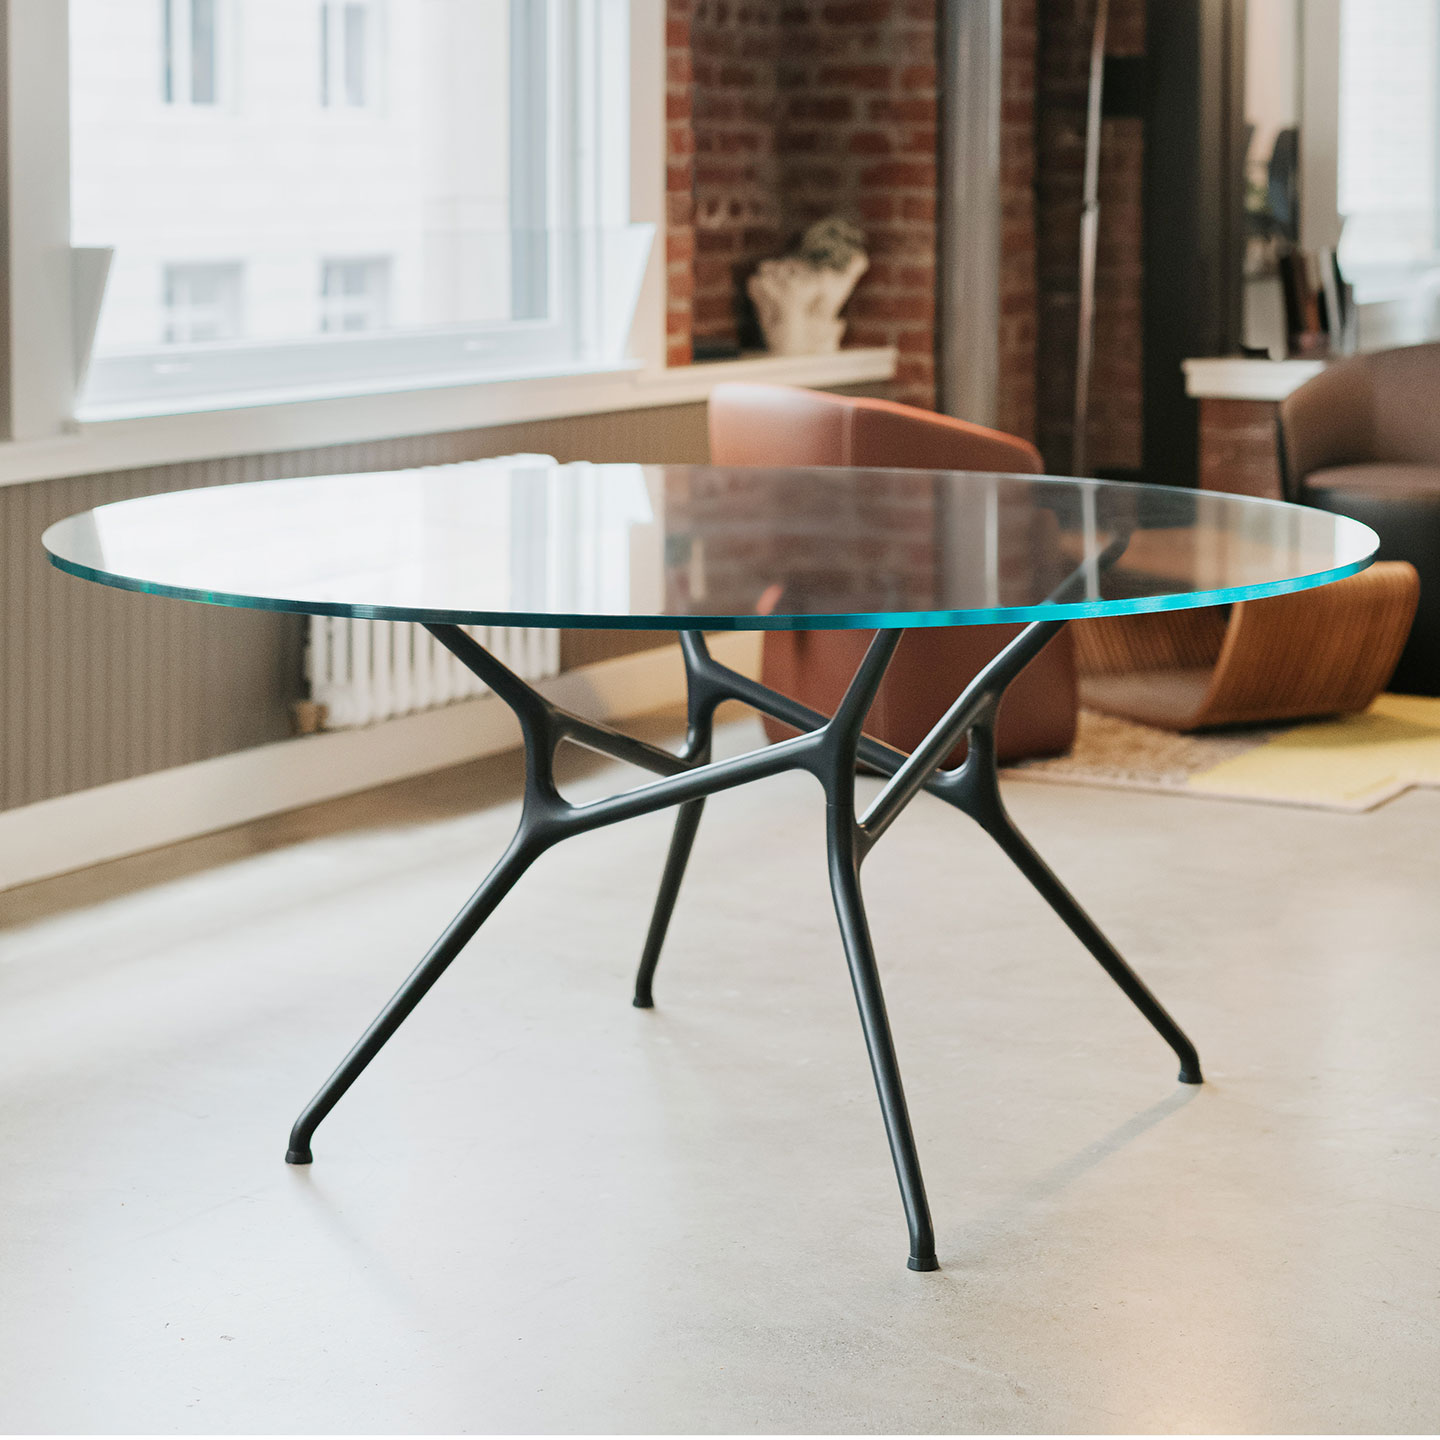 Haworth Branch table with circular clear glass top in a casual area next to a window